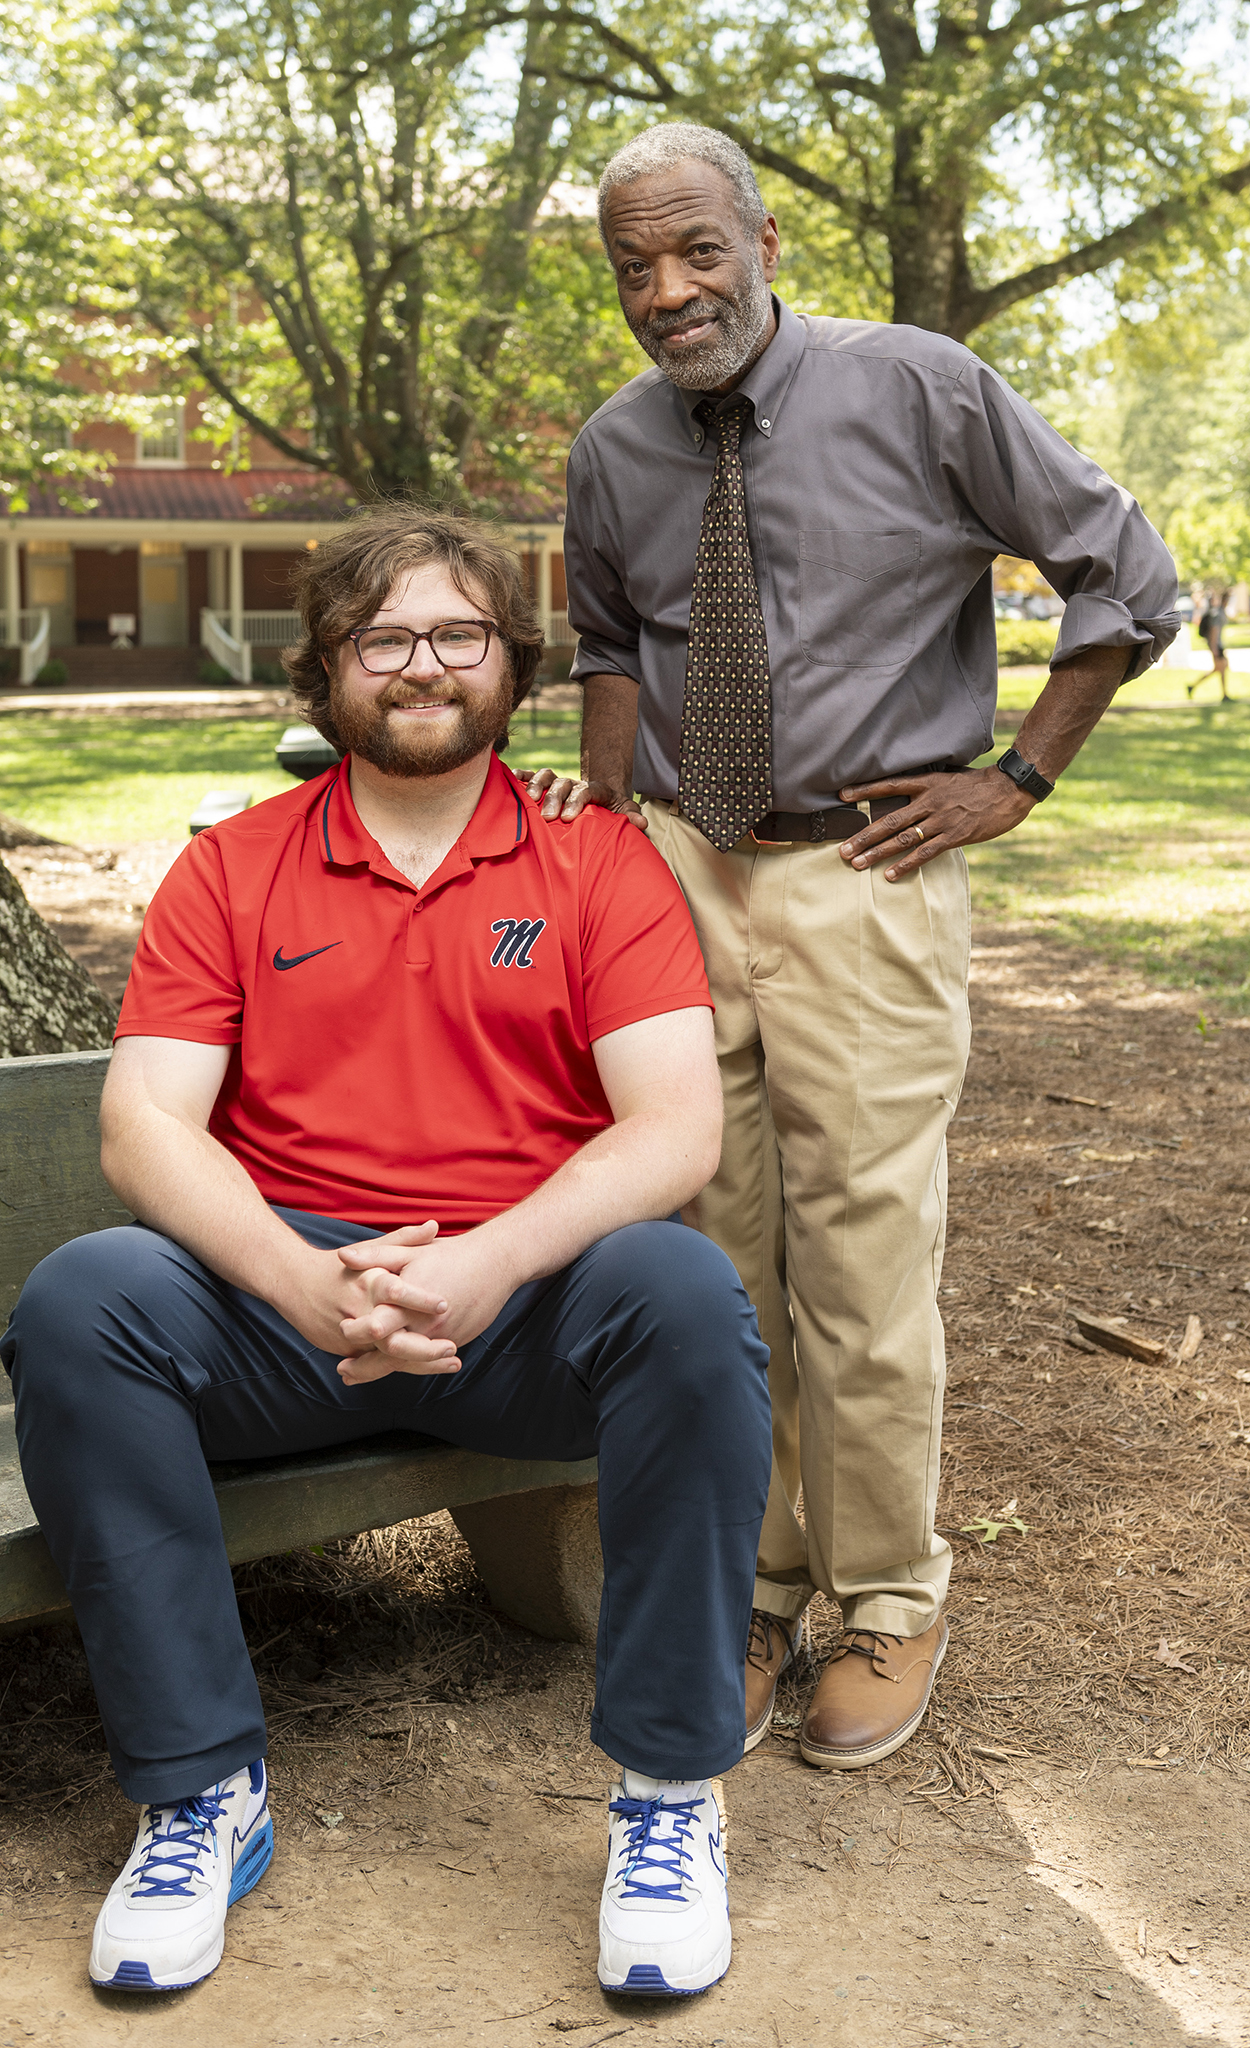 When Randy Morgan (left) was struggling in his graduate studies, he turned to sociology professor Kirk Johnson for help. The support Johnson gave him led Morgan to finish his graduate degree at Ole Miss, where he teaches Sociology 101. Photo by Srijita Chattopadhyay/Ole Miss Digital Imaging Services